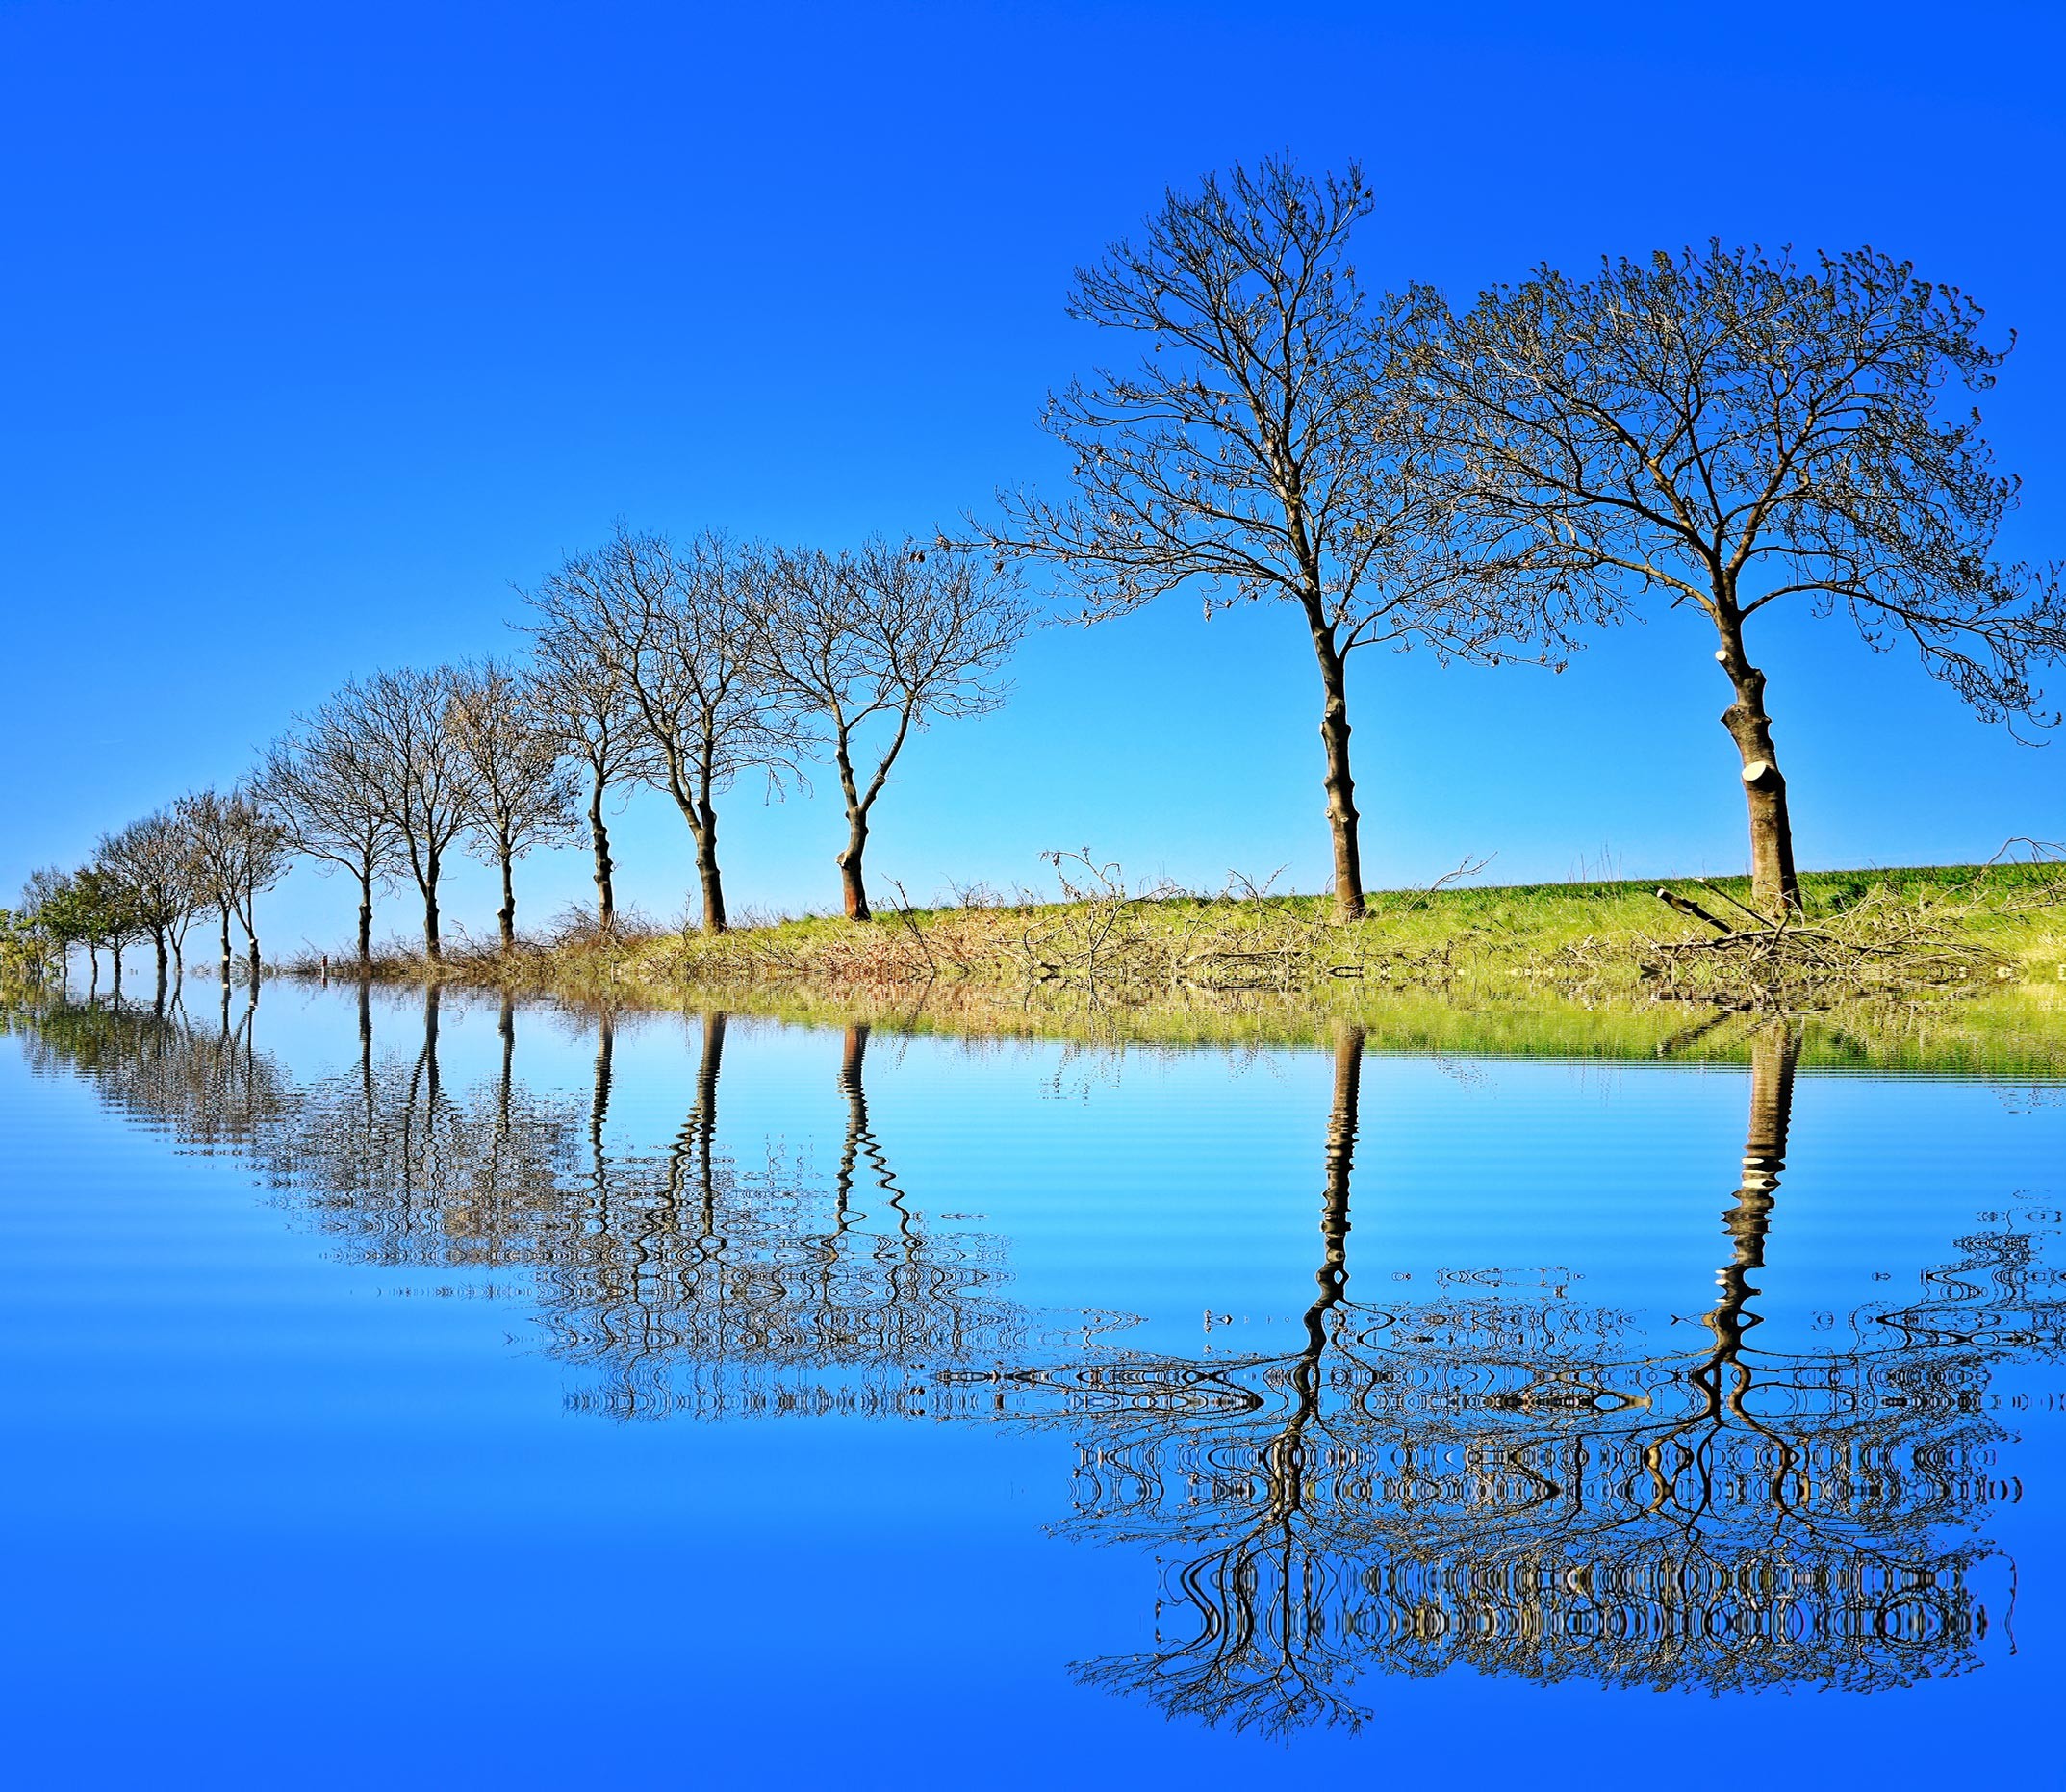 beautiful hd wallpaper download,natural landscape,reflection,nature,water resources,water